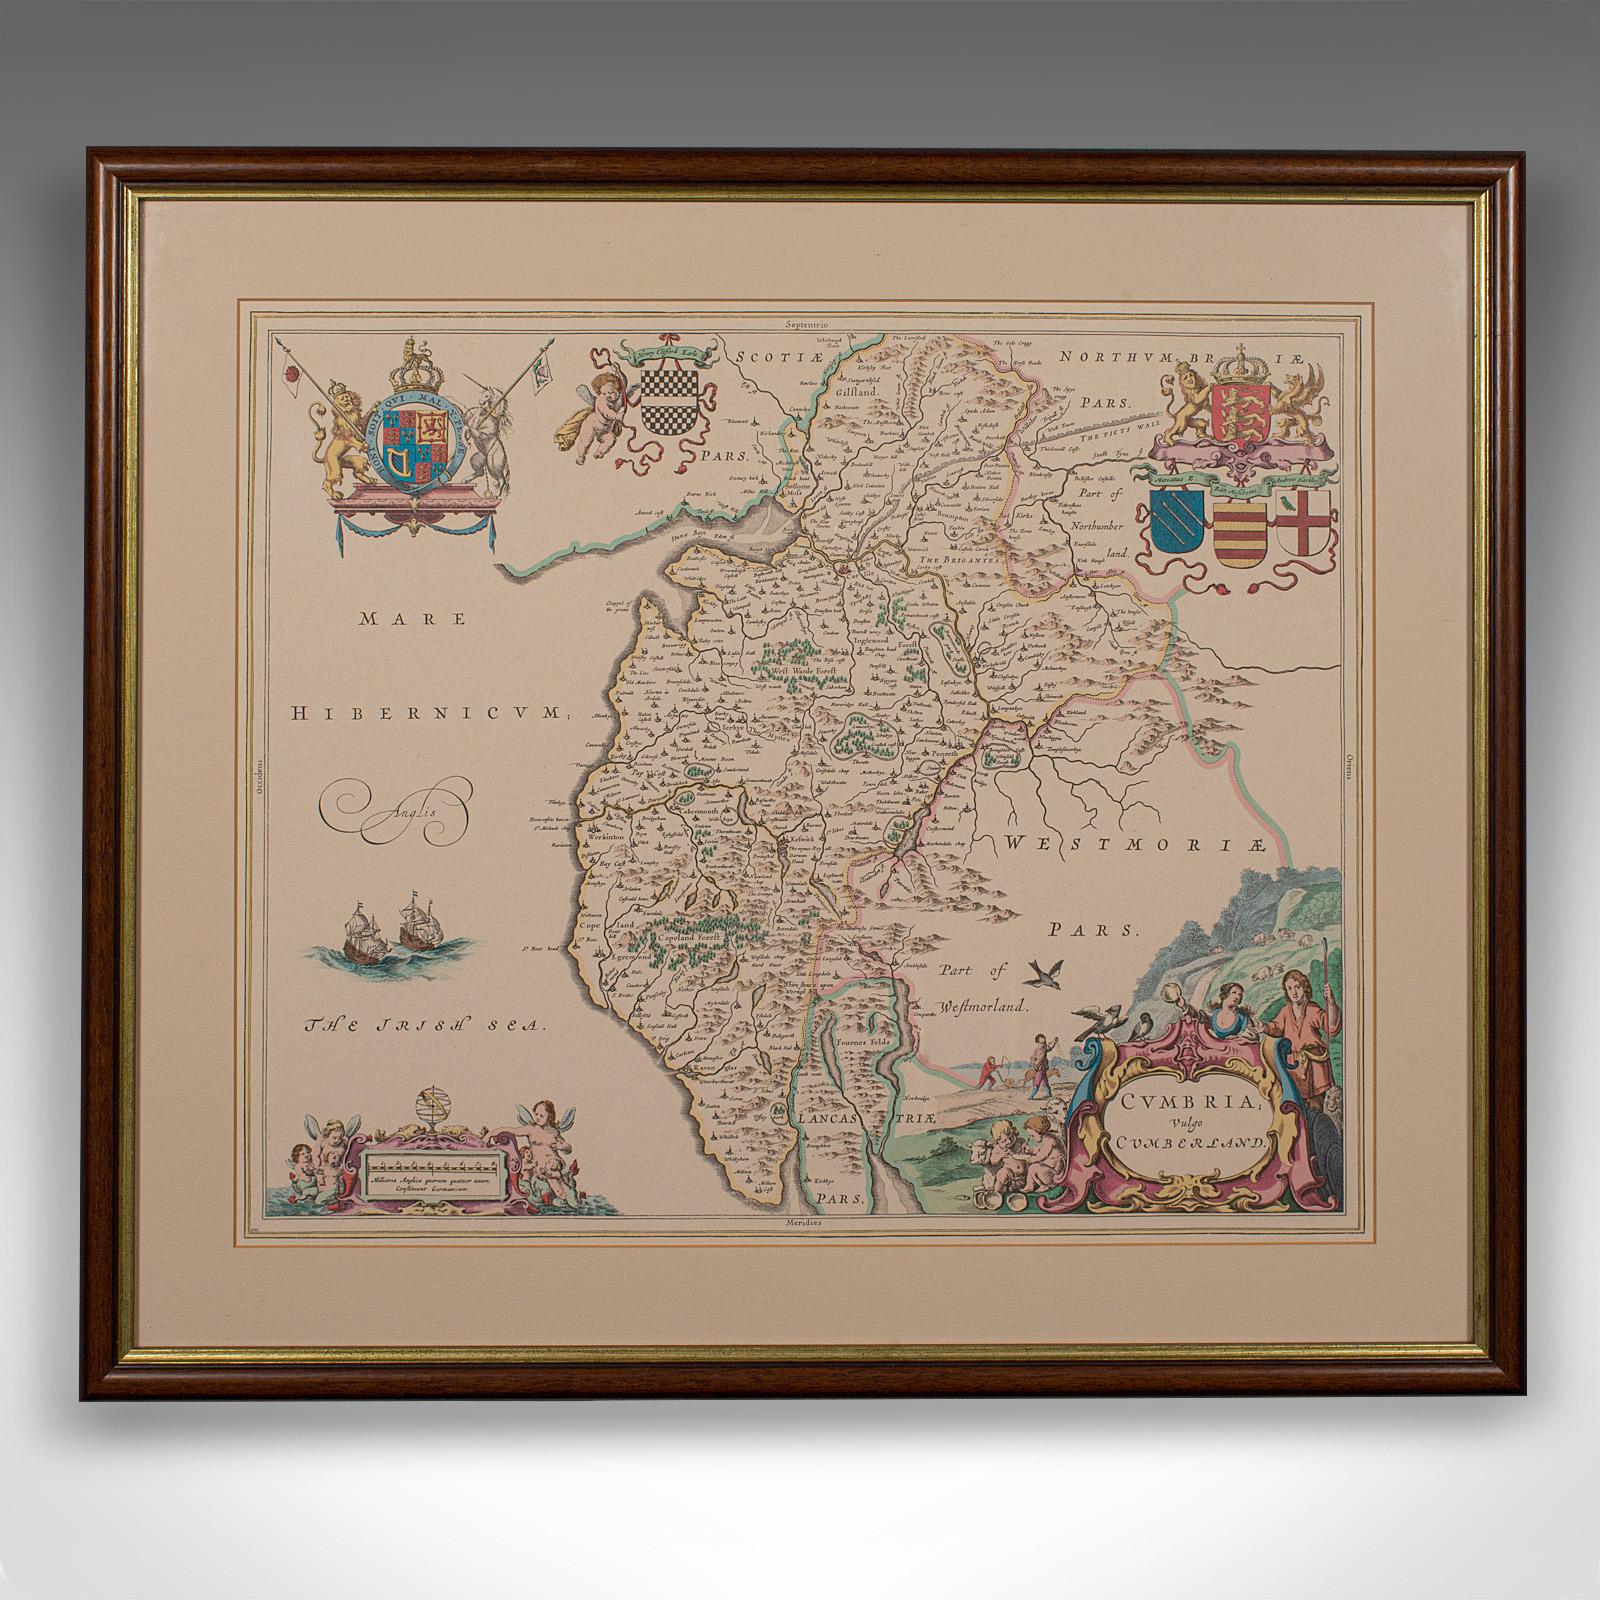 This is an antique lithography map of Cumbria. An English, framed engraving of cartographic interest, dating to the early 18th century and later.

Charming lithography of Cumbria with appealing decorative flourishes
Displaying a desirable aged